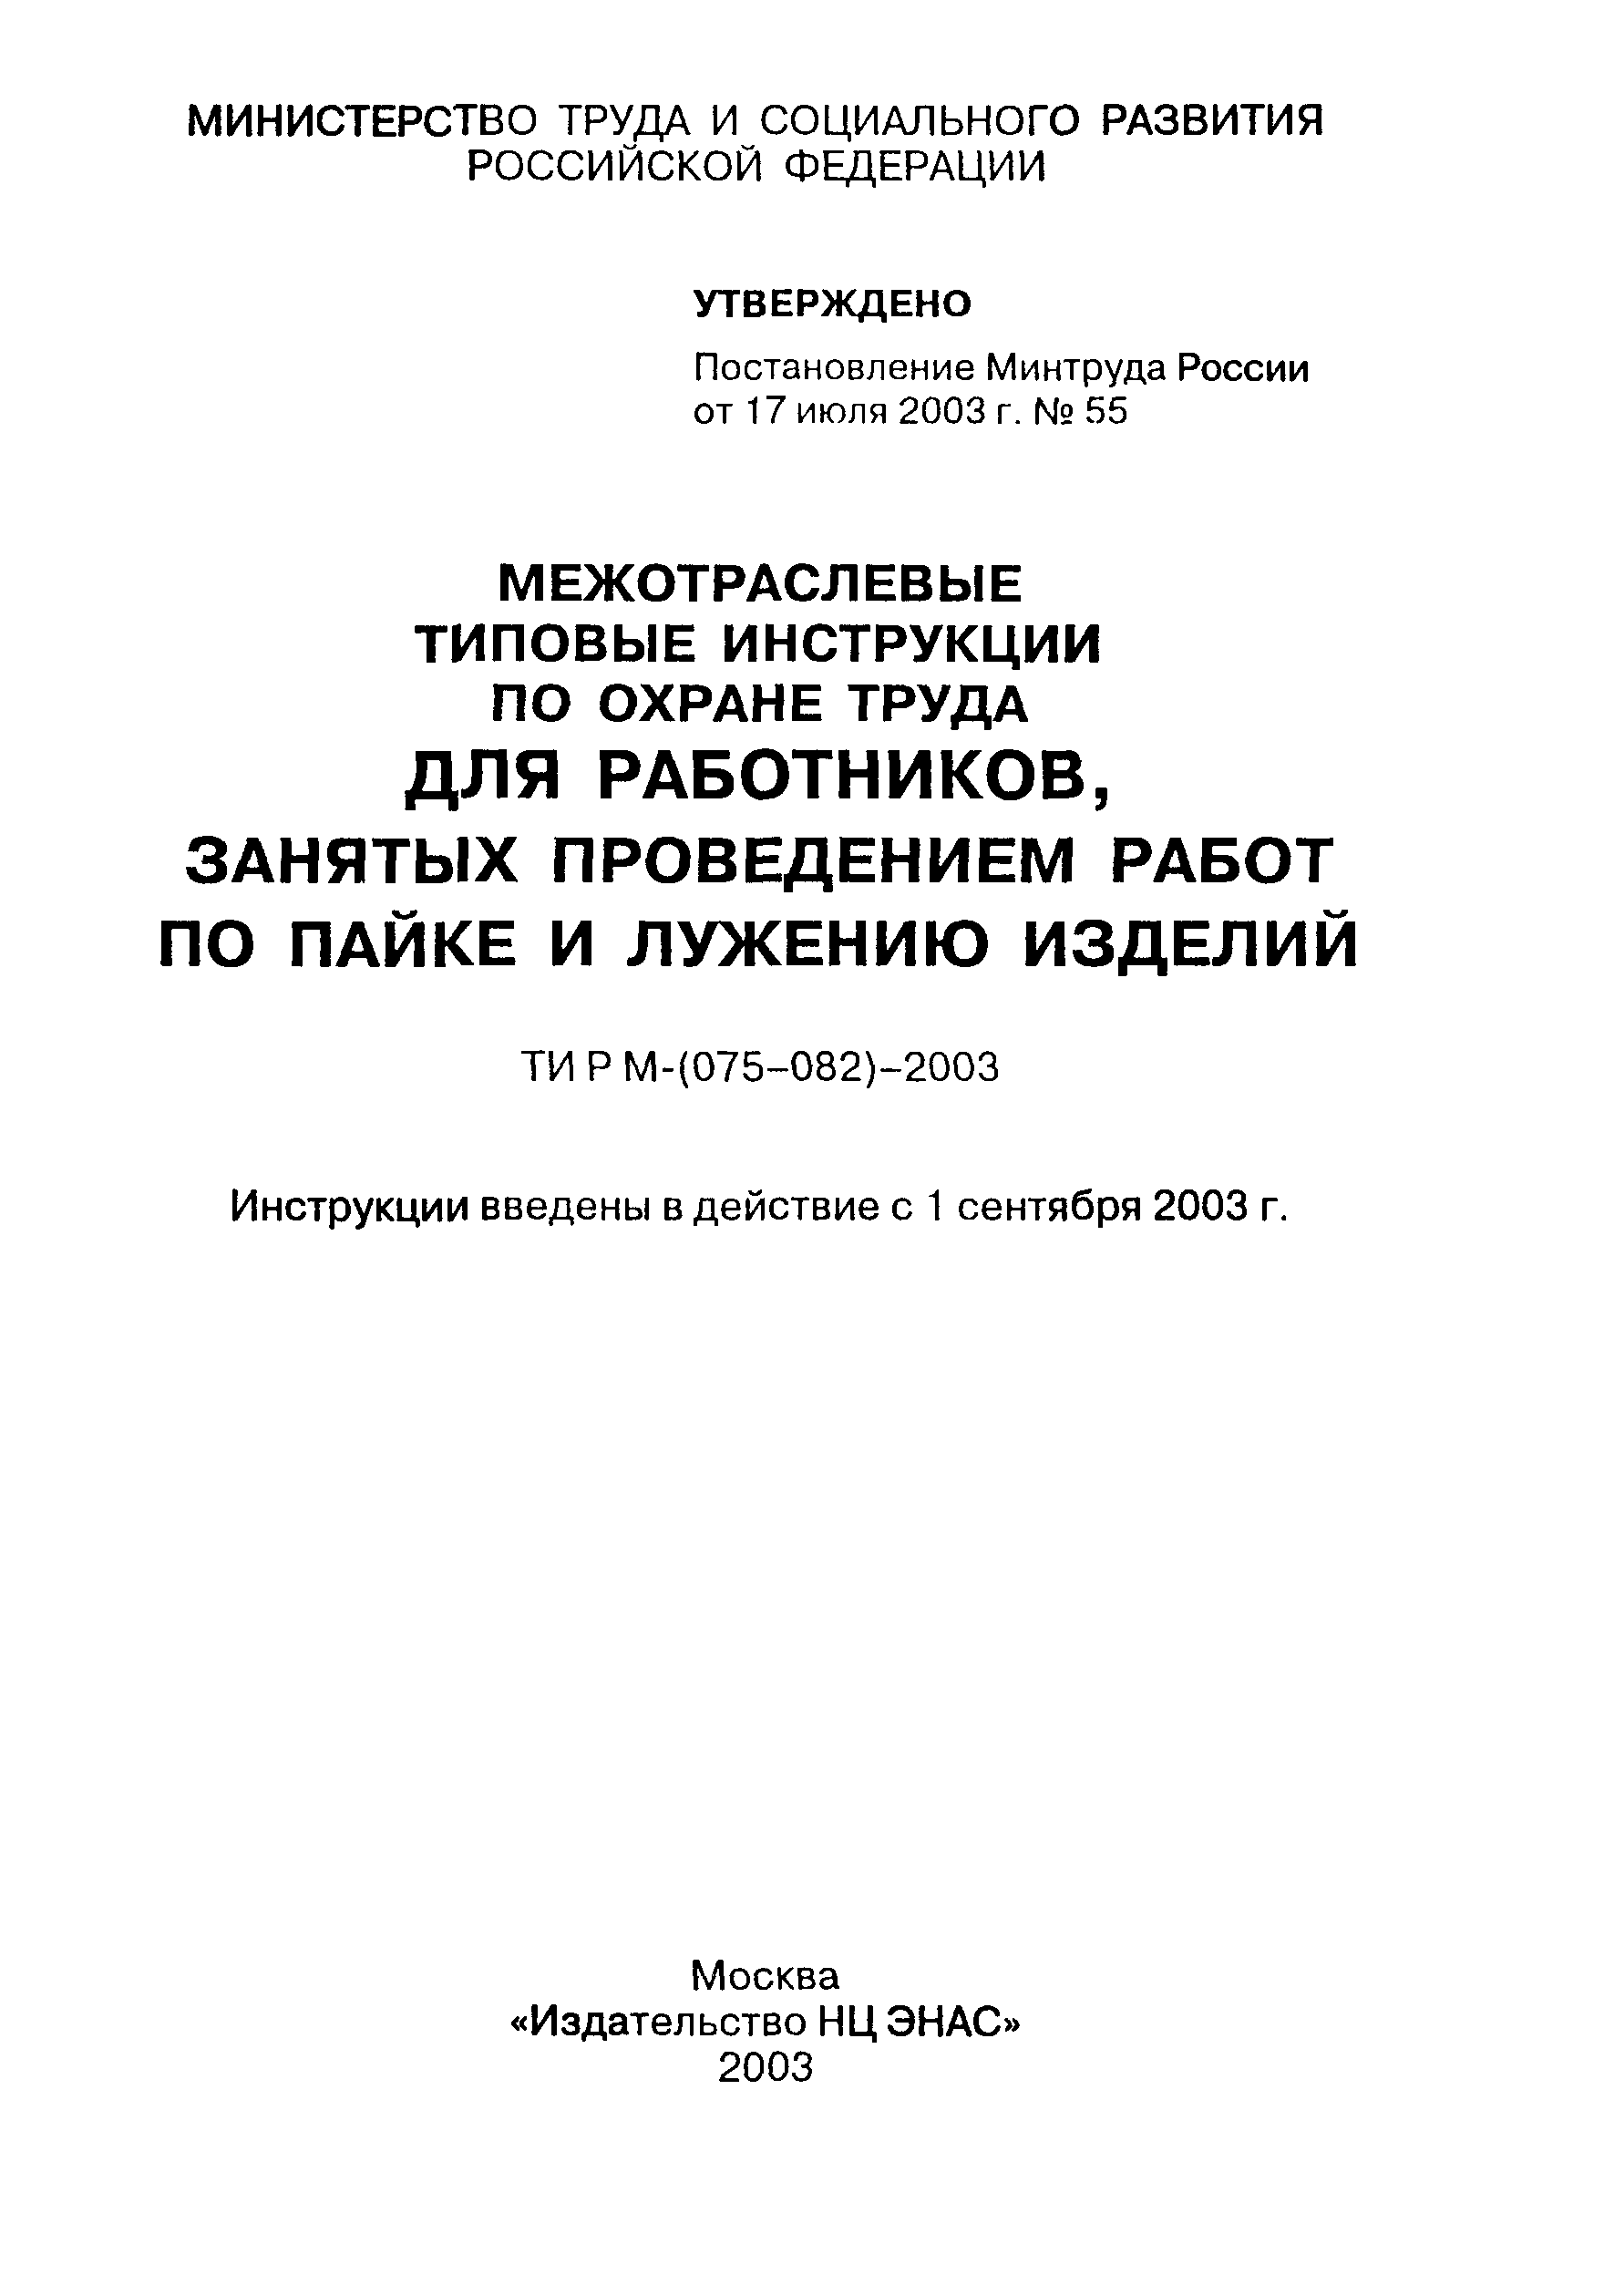 ТИ Р М-082-2003